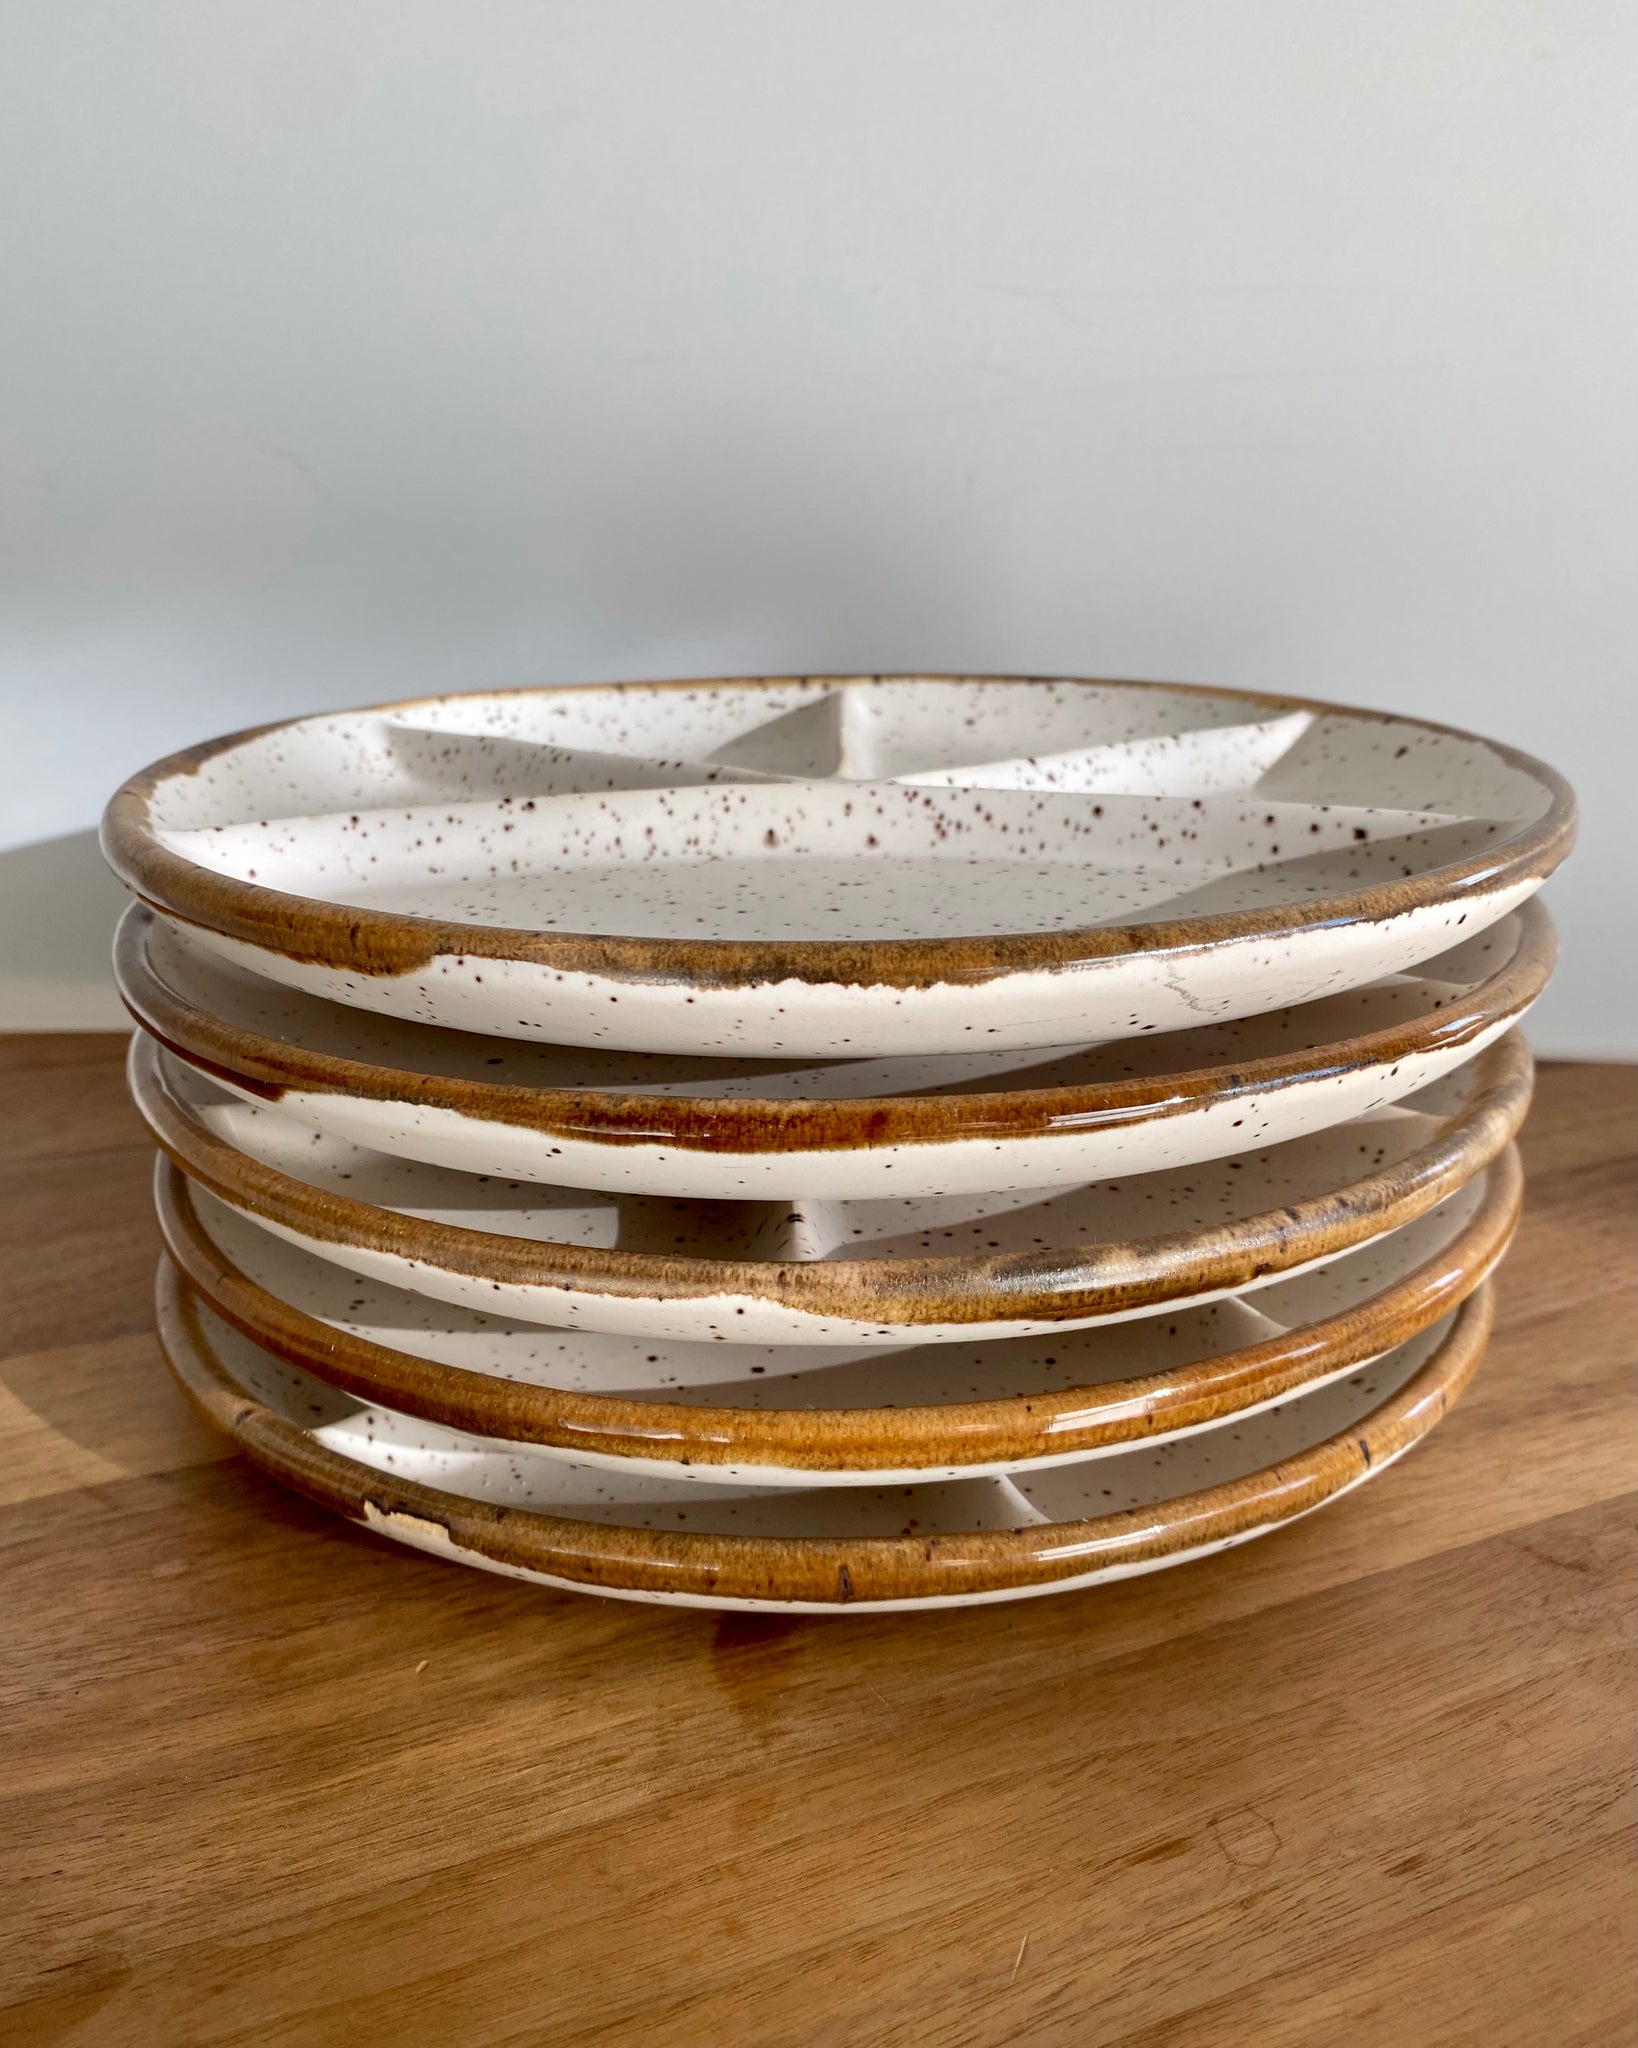 Speckled beige and brown plates set of 5